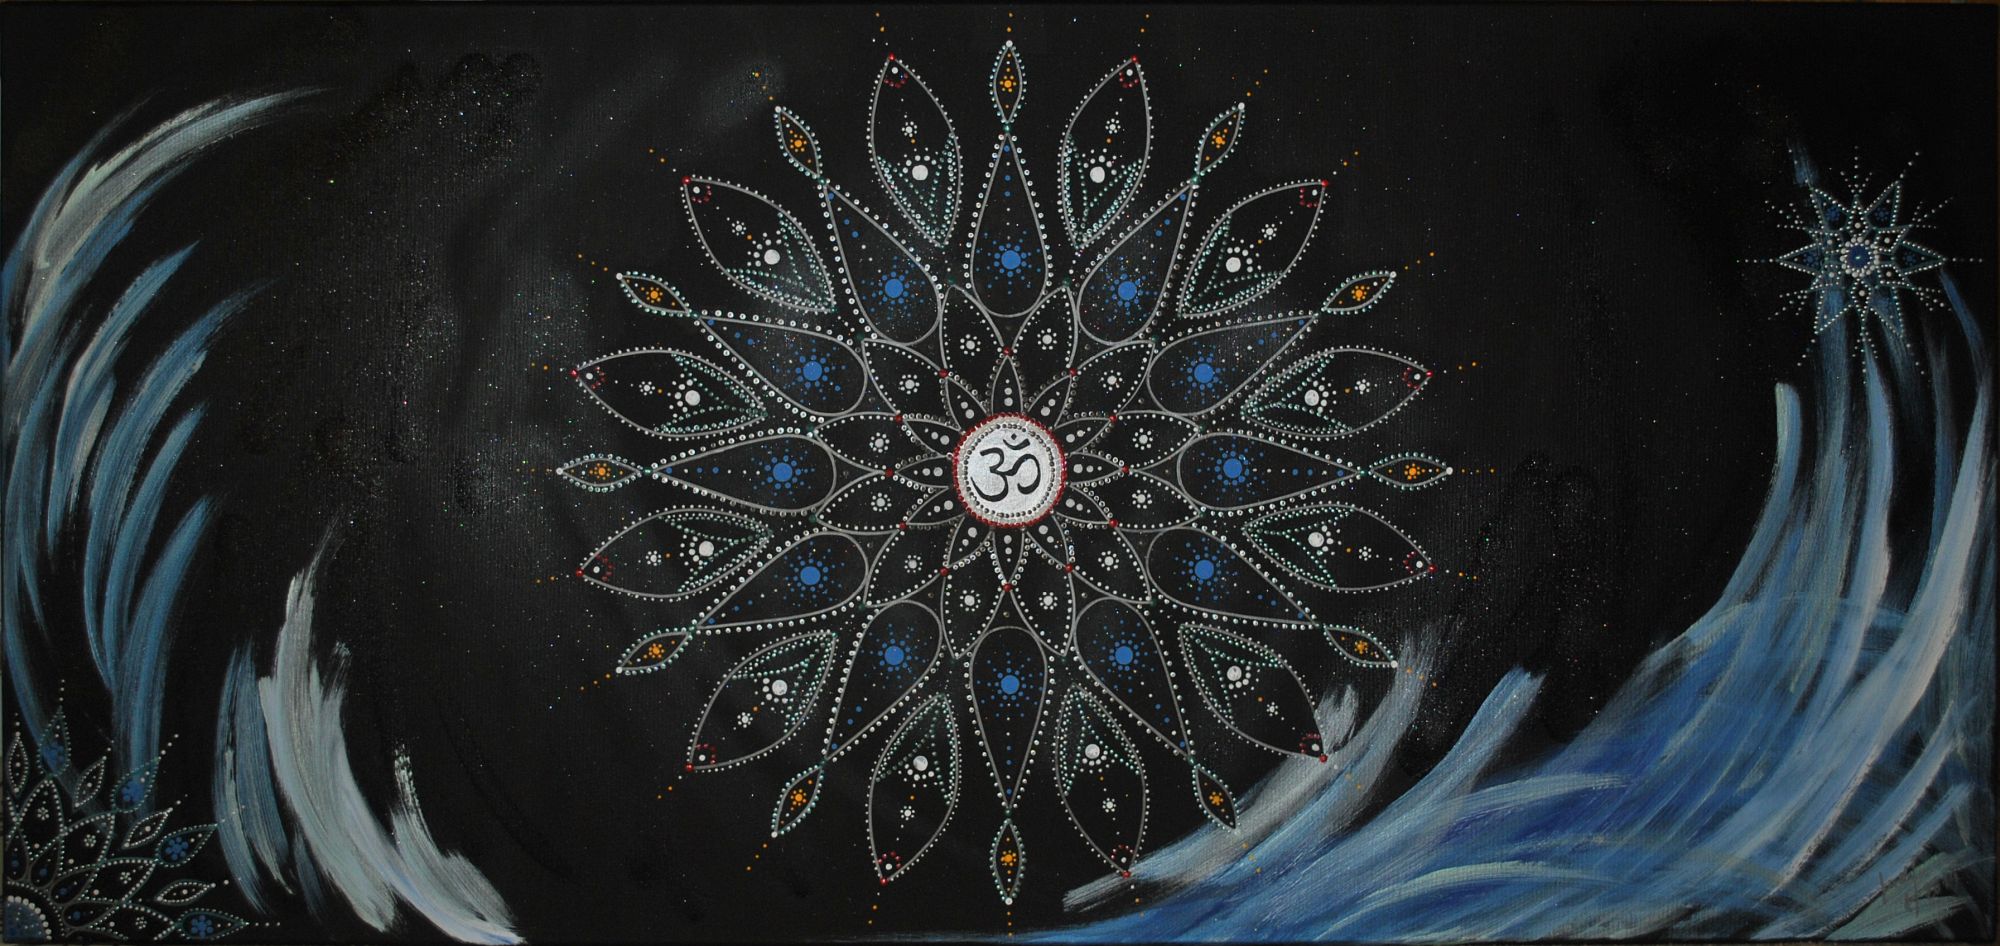 Painted mandala for water signs in blue and silver tones. Large central with a namaste sign, two smaller mandalas on the sides
Signed
